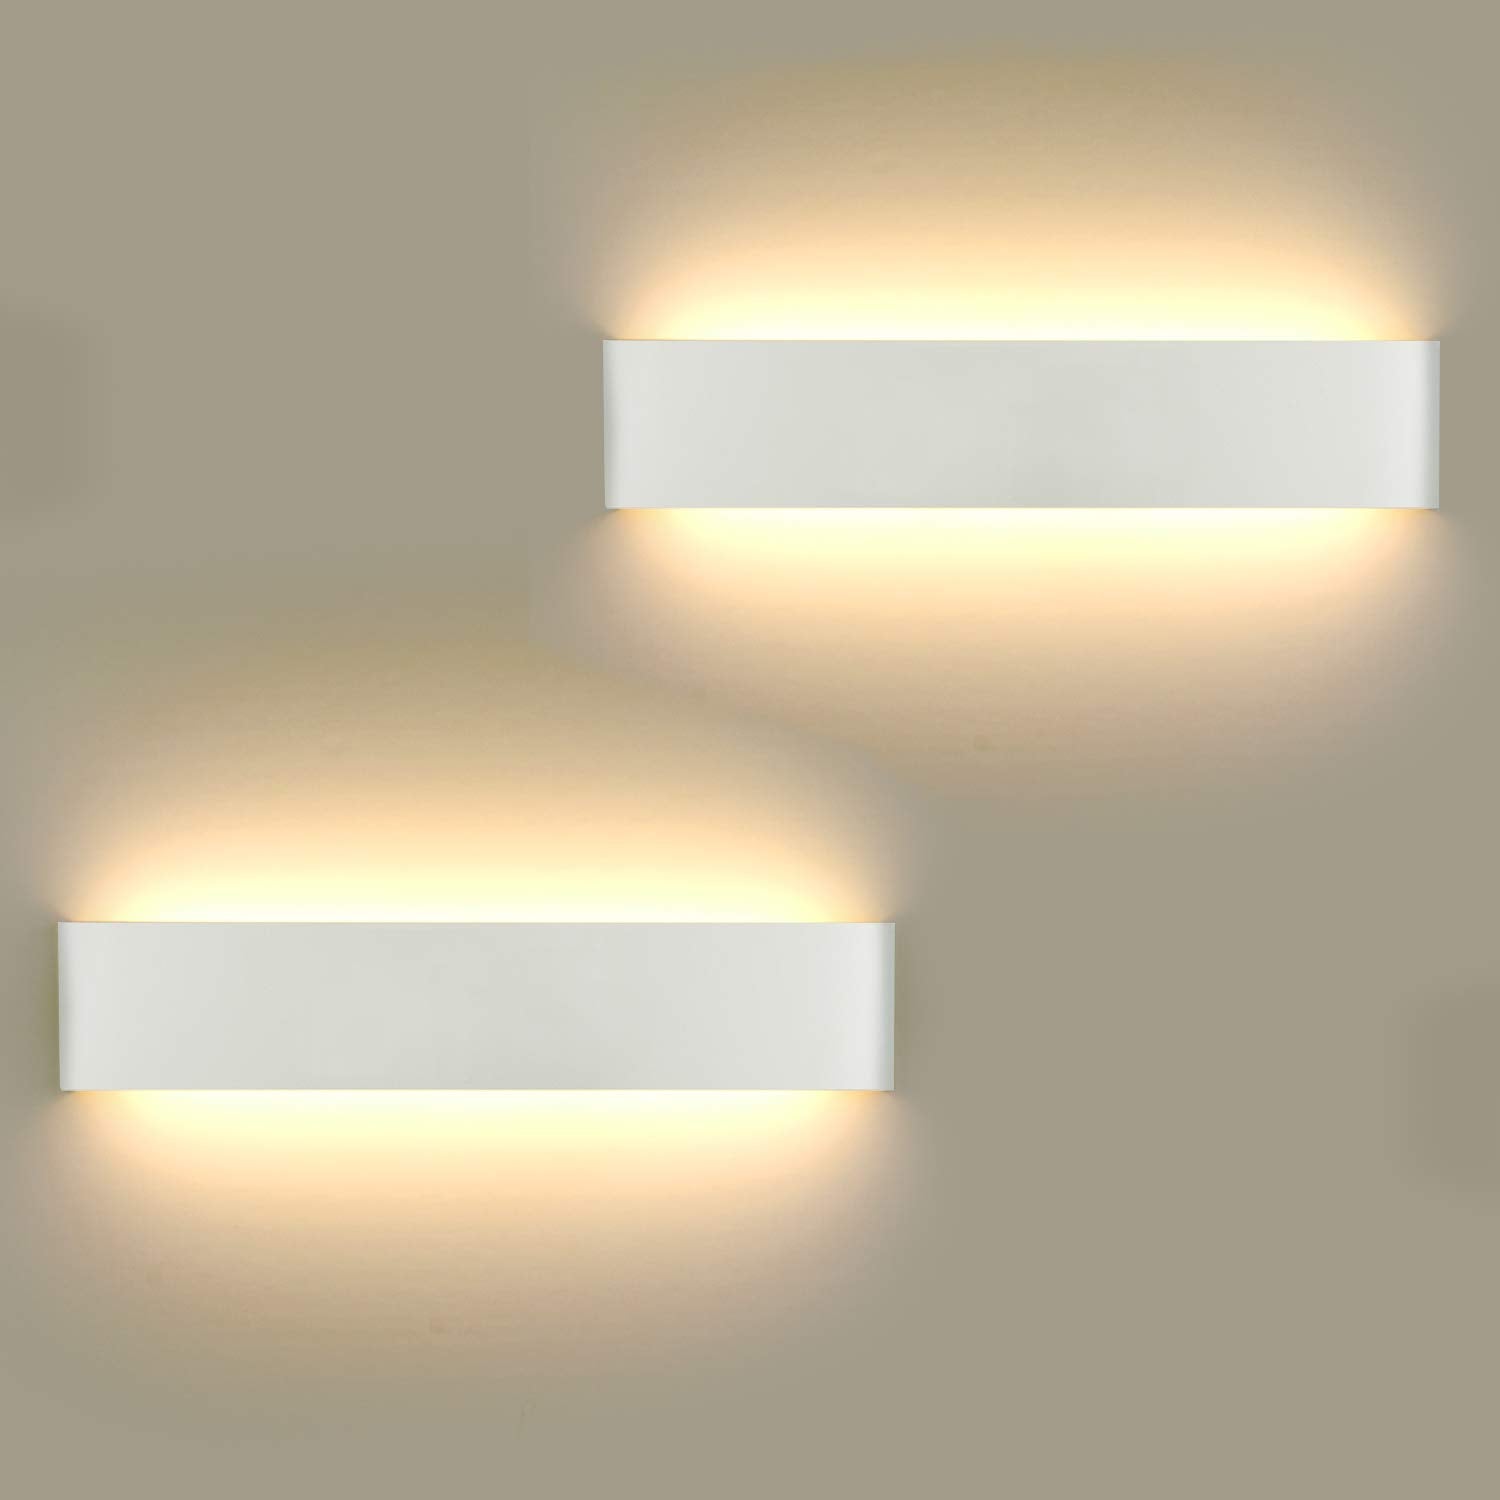 2 Pieces Wall lamp LED 16W Wall Light Modern Wall Lamps Indoor Wall Lights Including LED Plate 110V-260V for Bathroom lamp Living Room Bedroom Staircase Hallway Wall Lighting, Warm White 3000 K